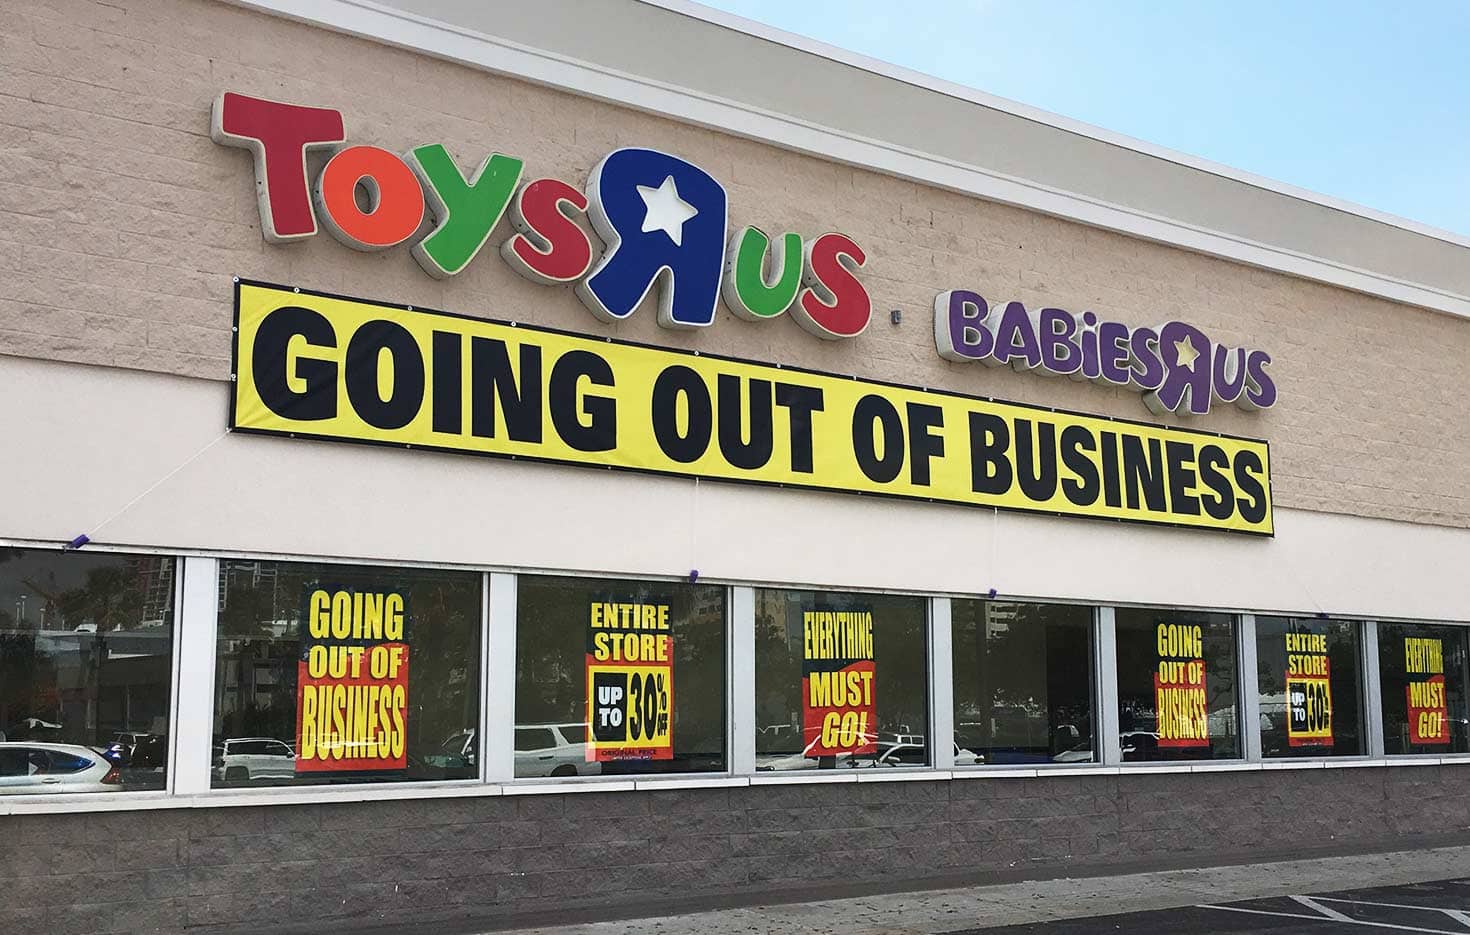 Toys R Us Out of Business